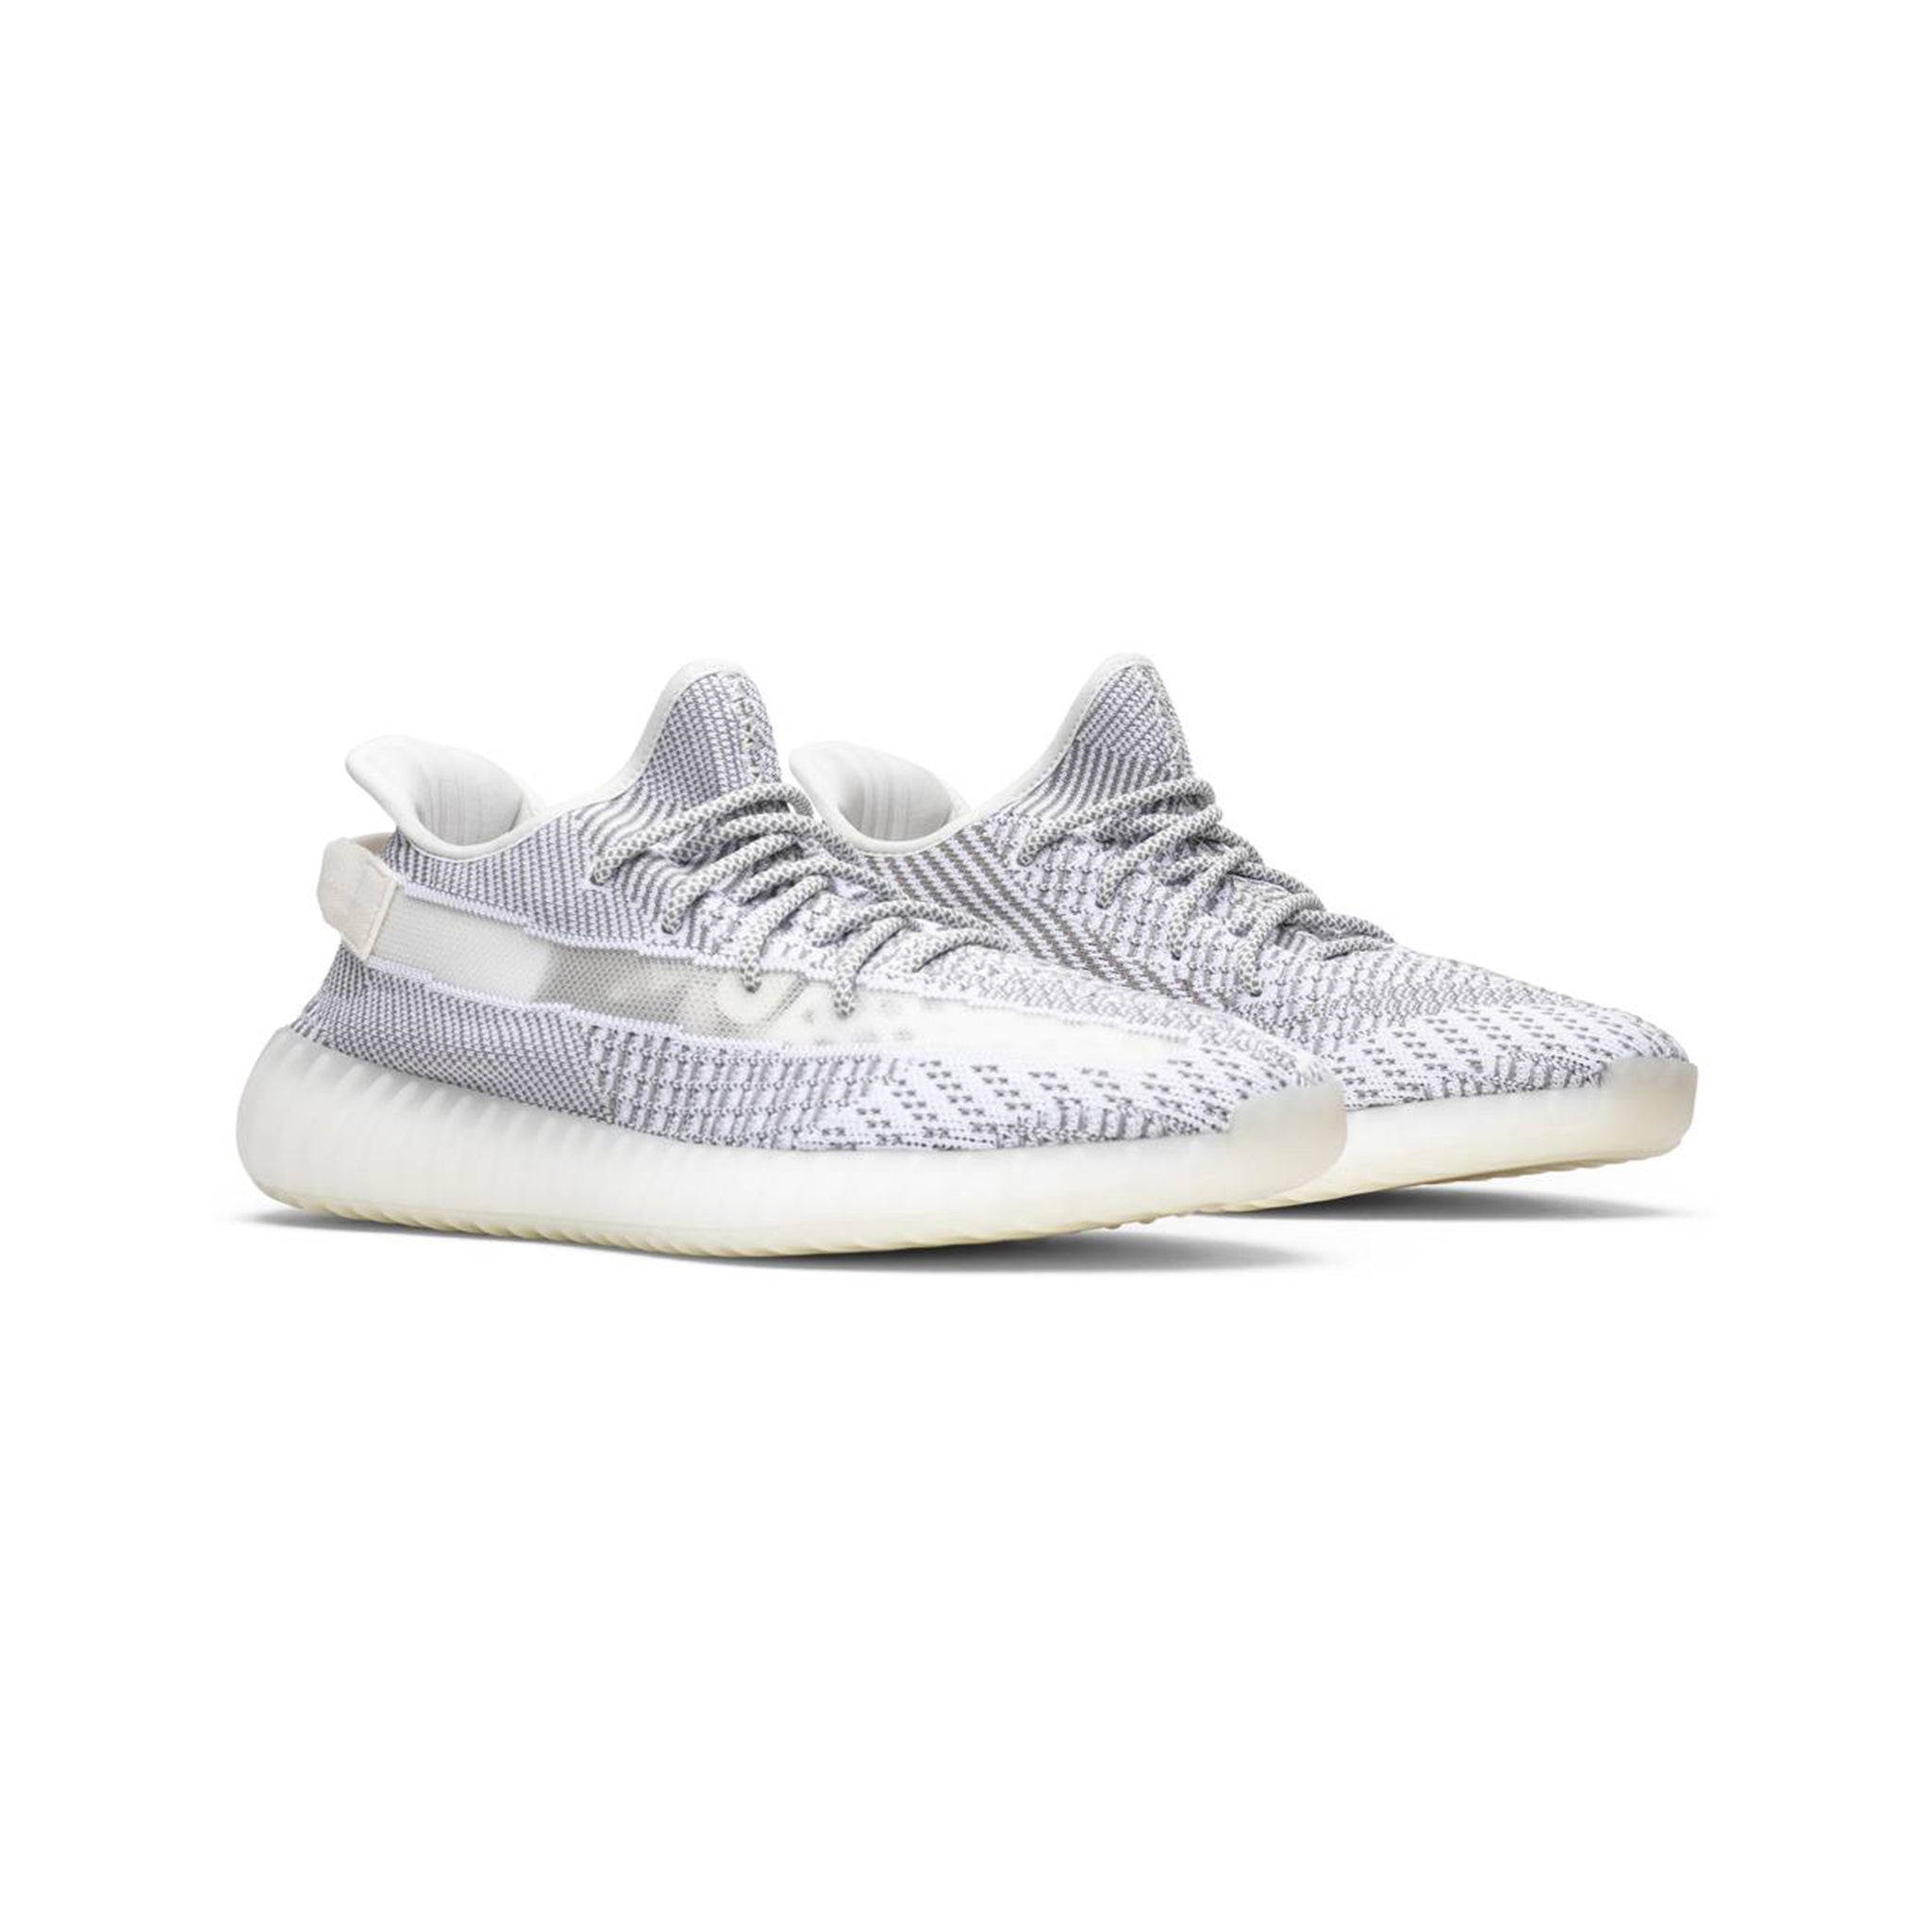 ADIDAS YEEZY BOOST 350 V2 STATIC (NON-REFLECTIVE)